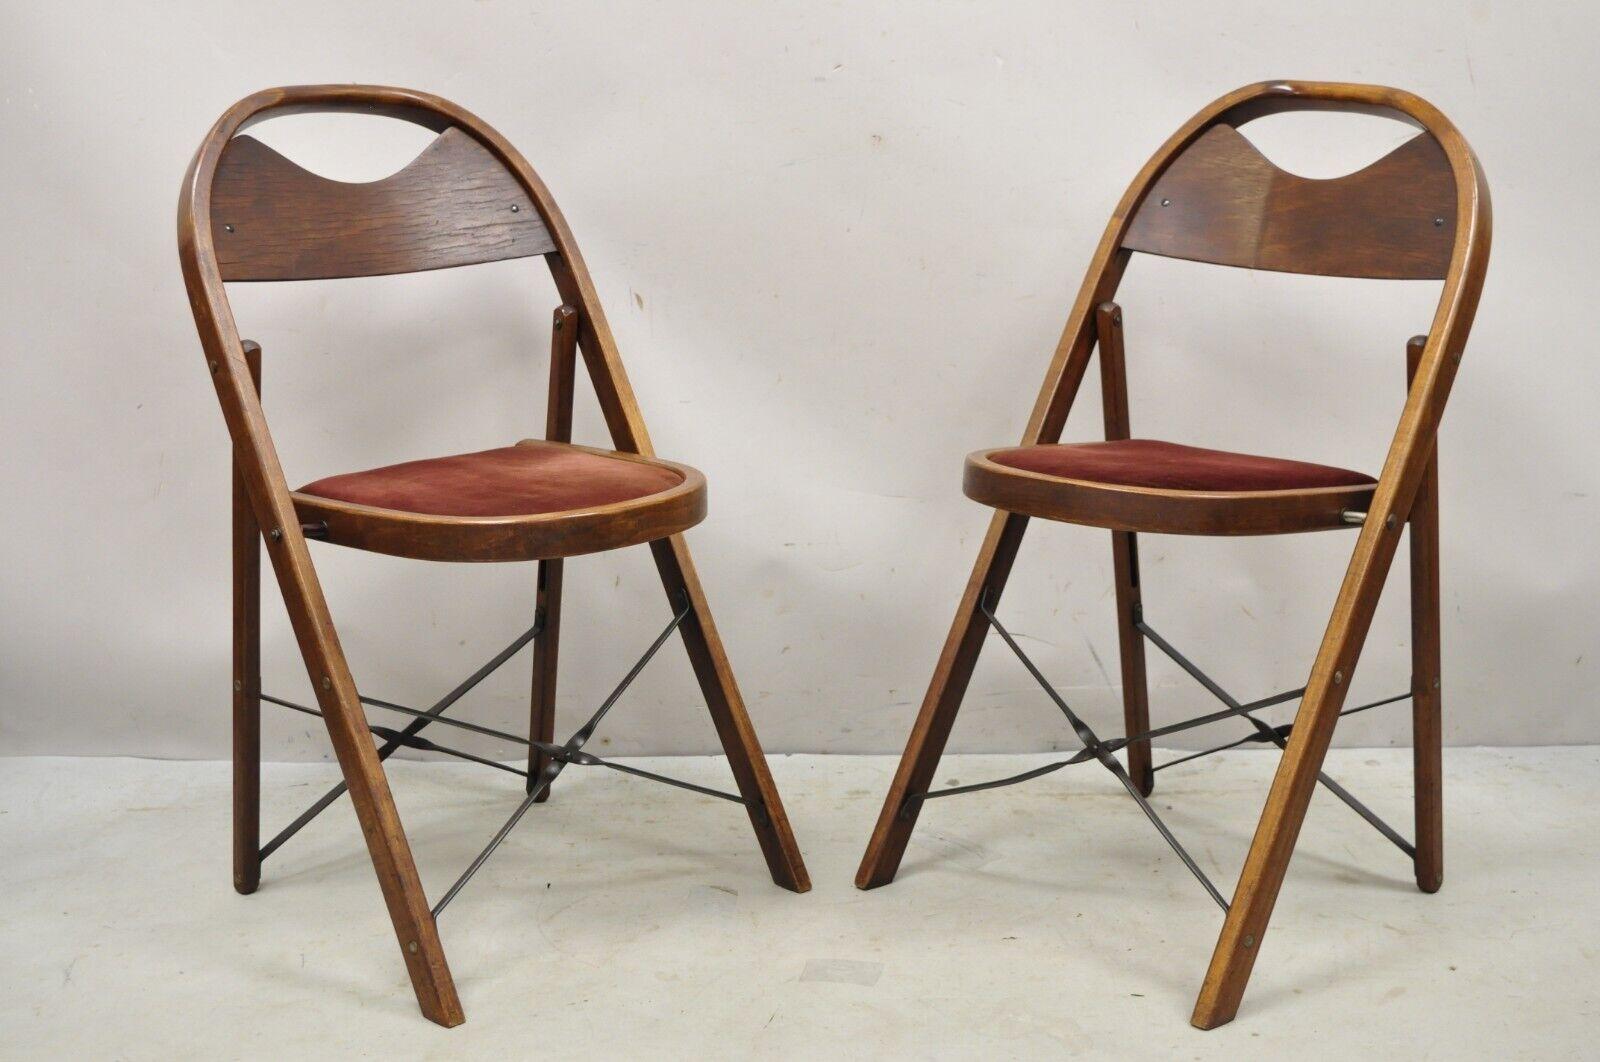 Vintage Art Deco Wooden Theatre Folding Chairs by General Sales Co Set of 6 (B). Item features upholstered seats, metal cross stretcher, bentwood frames, original label, very nice vintage set, (2) sets of 6 currently available, price is per set.